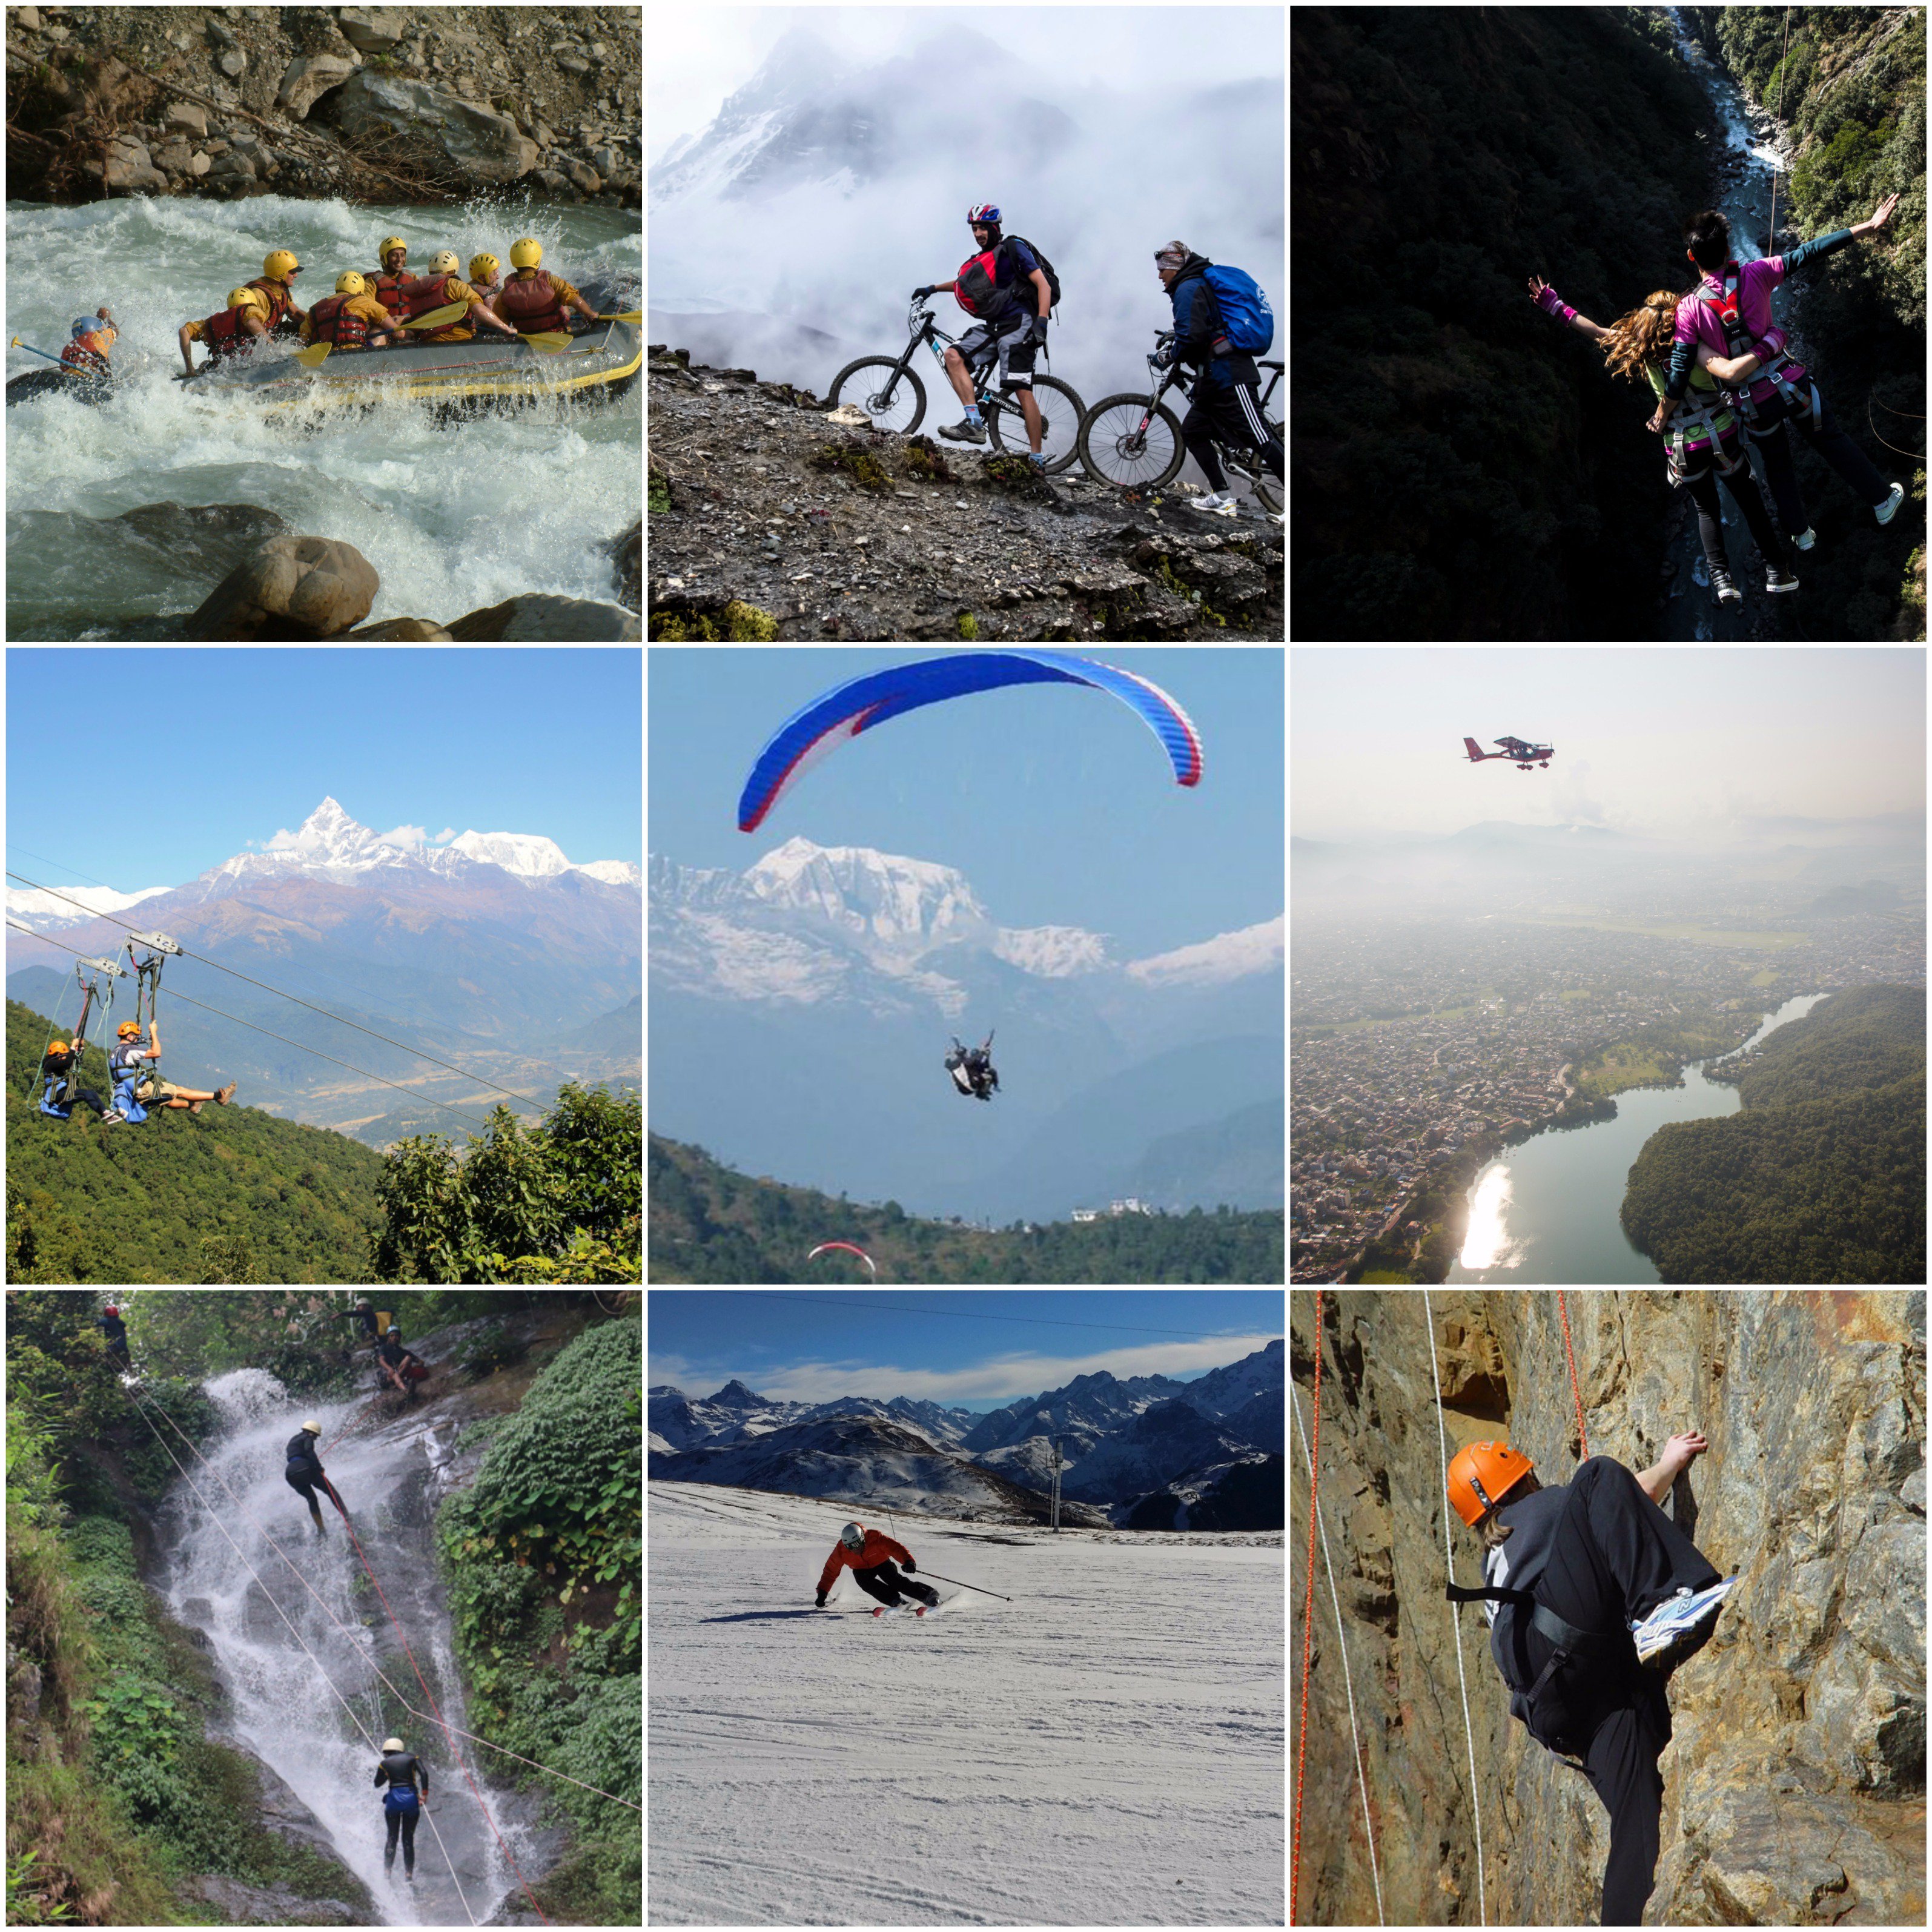 Himalayan Holidays on Twitter: "Top 10 extreme #Adventure #Sports to enjoy  in #Nepal https://t.co/Uzxl2xebh2 #Adventures #adventureSports #VisitNepal  #Gumphir #Travelnepal https://t.co/I73ny4uhyG" / Twitter